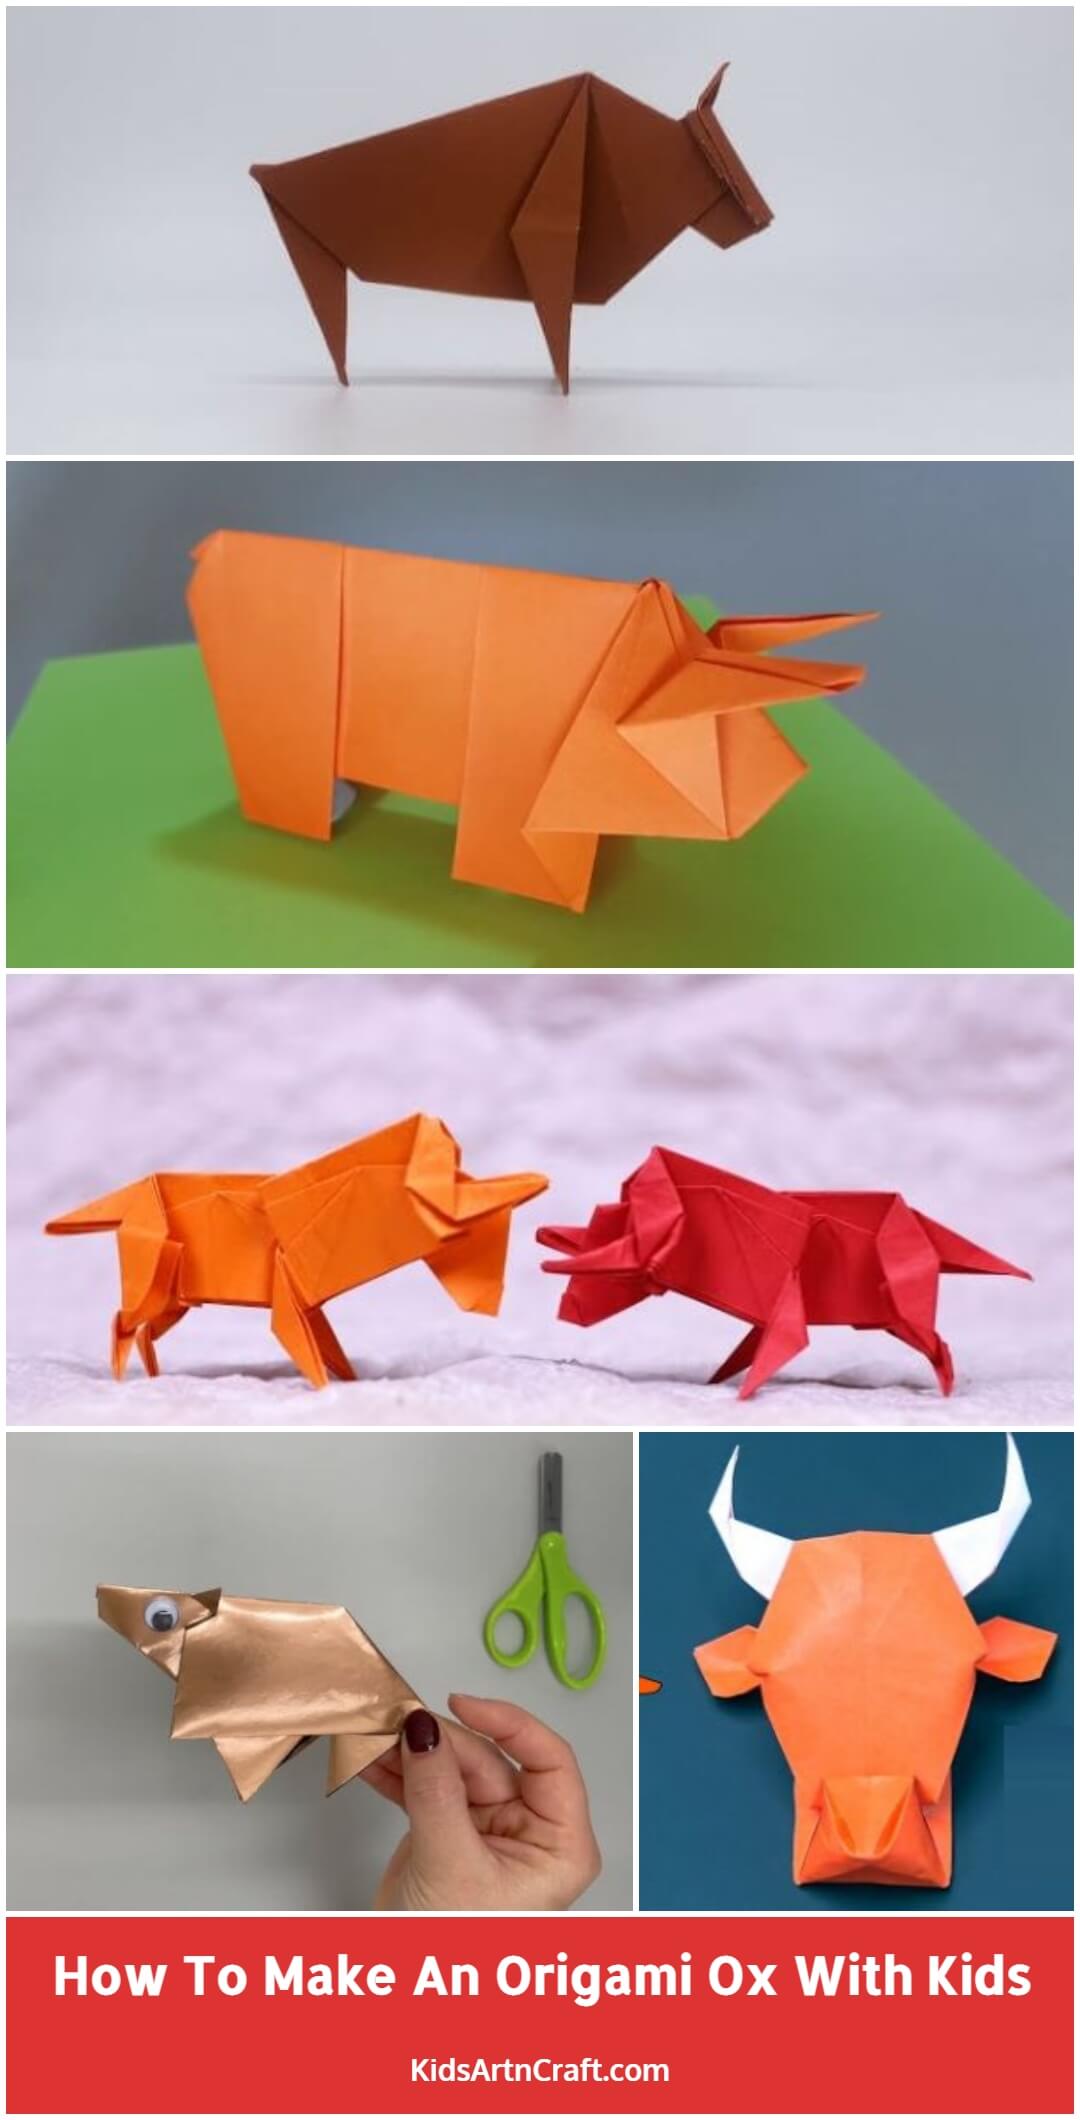 How To Make An Origami Ox With Kids